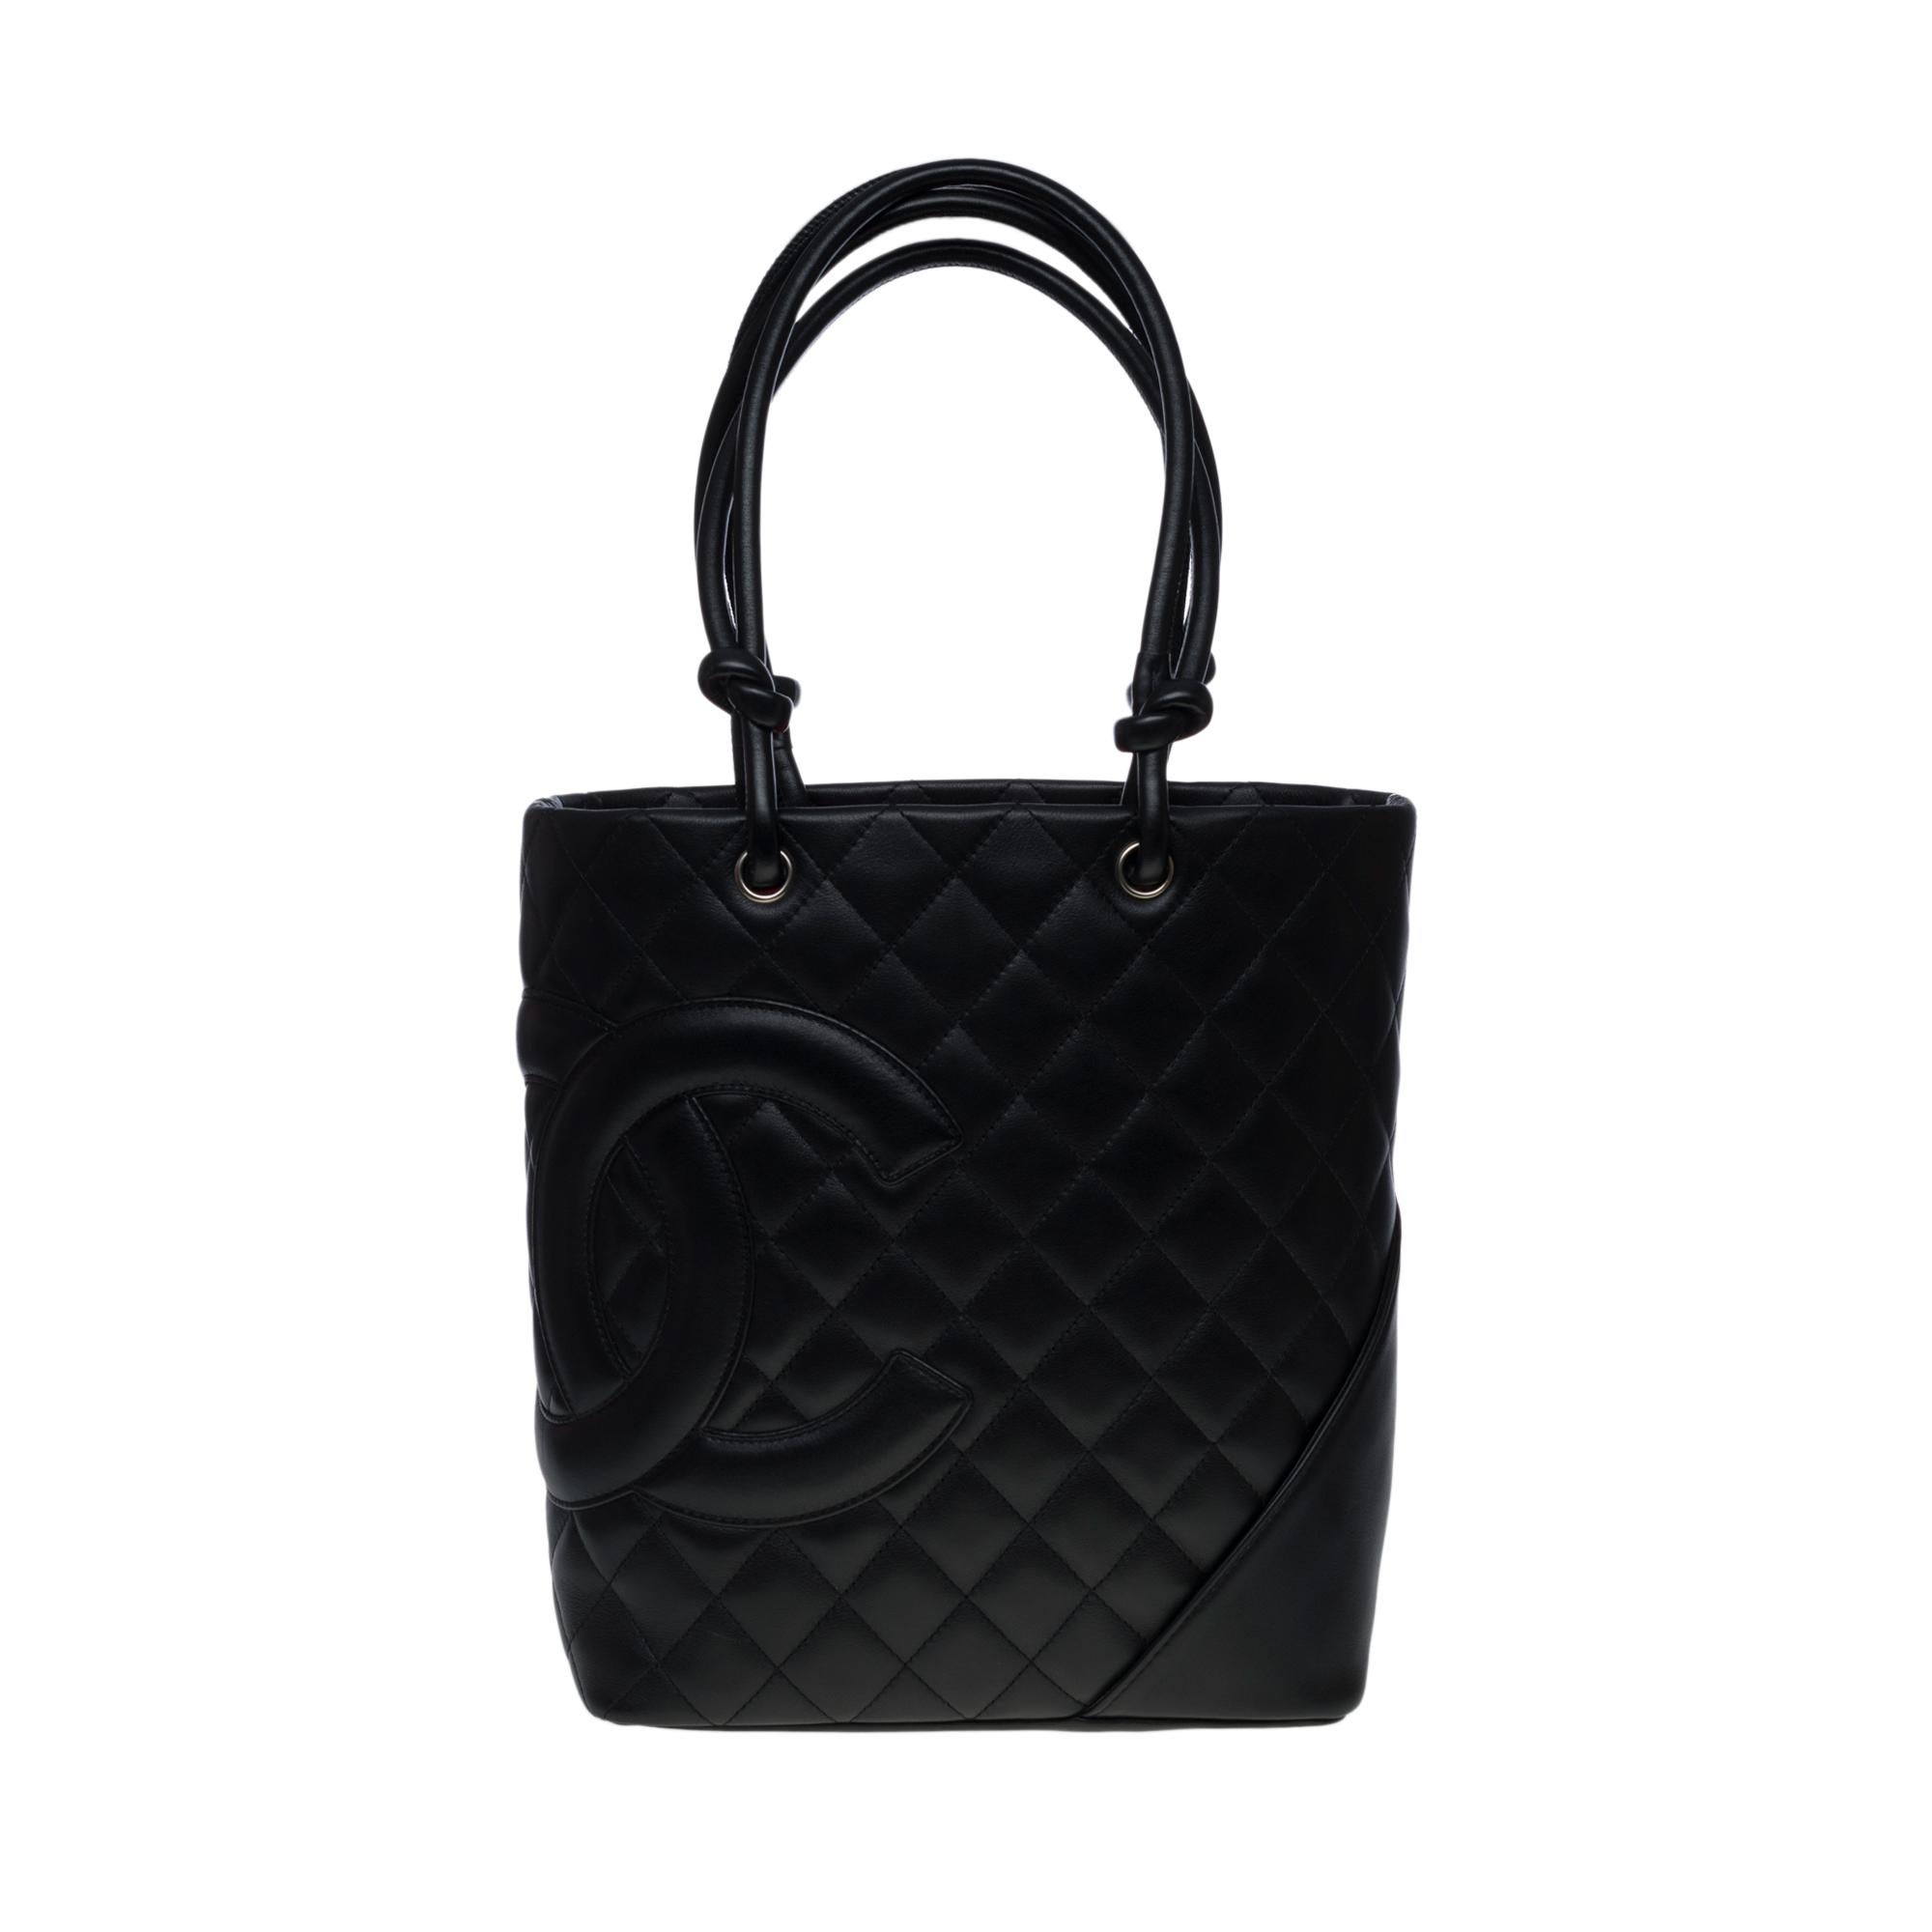 Splendid Chanel Cambon Tote bag in black quilted lambskin leather, silver-tone metal hardware,
double handle in black leather for hand or shoulder support
Zip closure
Inner lining in fluorescent pink CC fabric, two zipped pockets, two pen